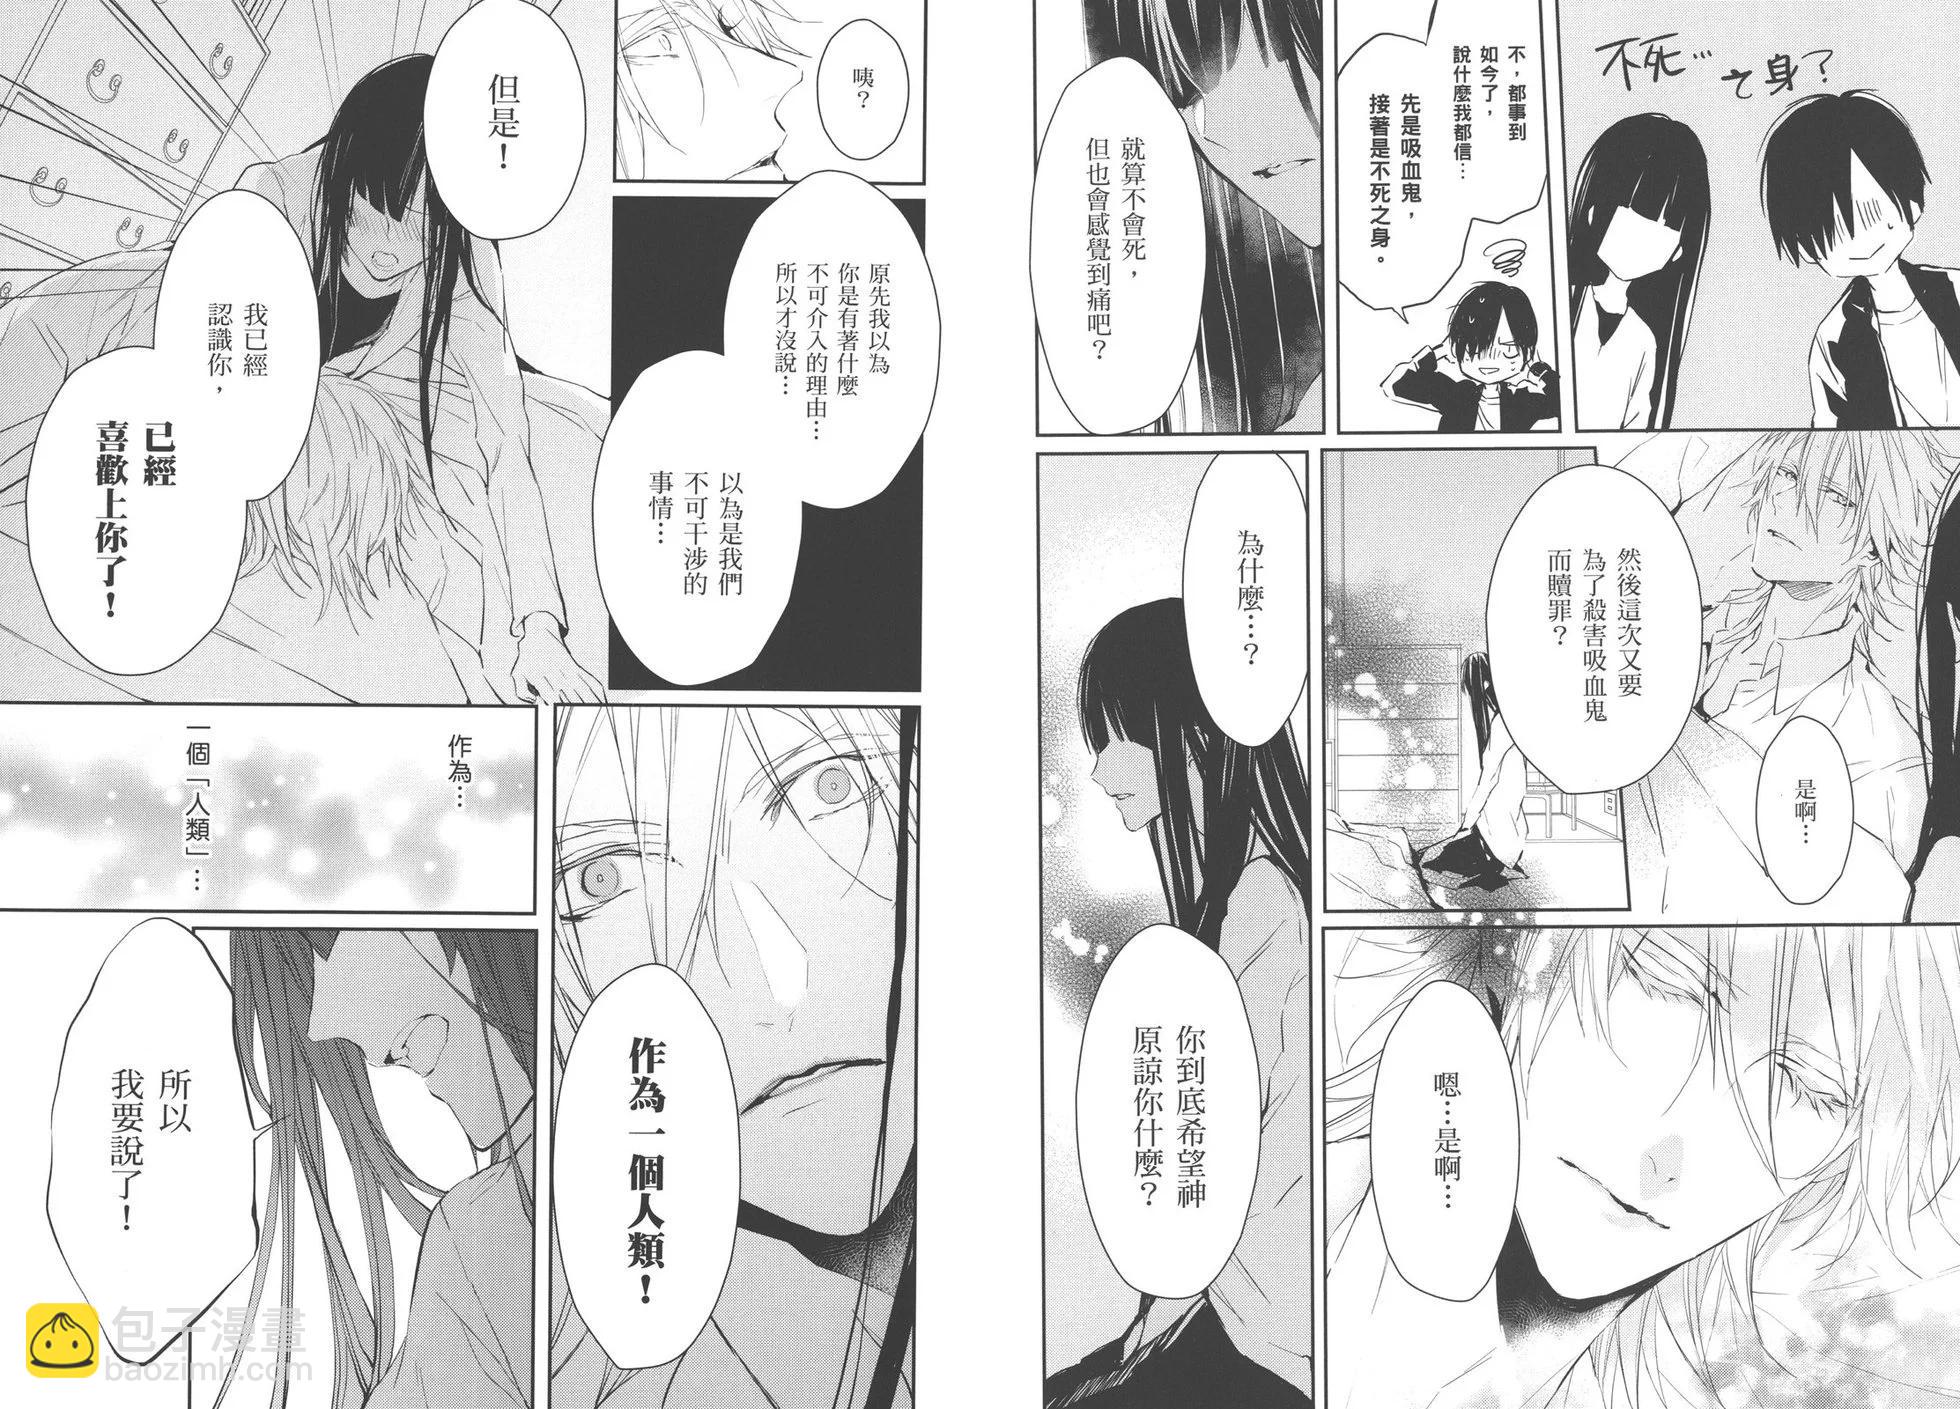 Bloody Mary - 第04卷(1/2) - 8